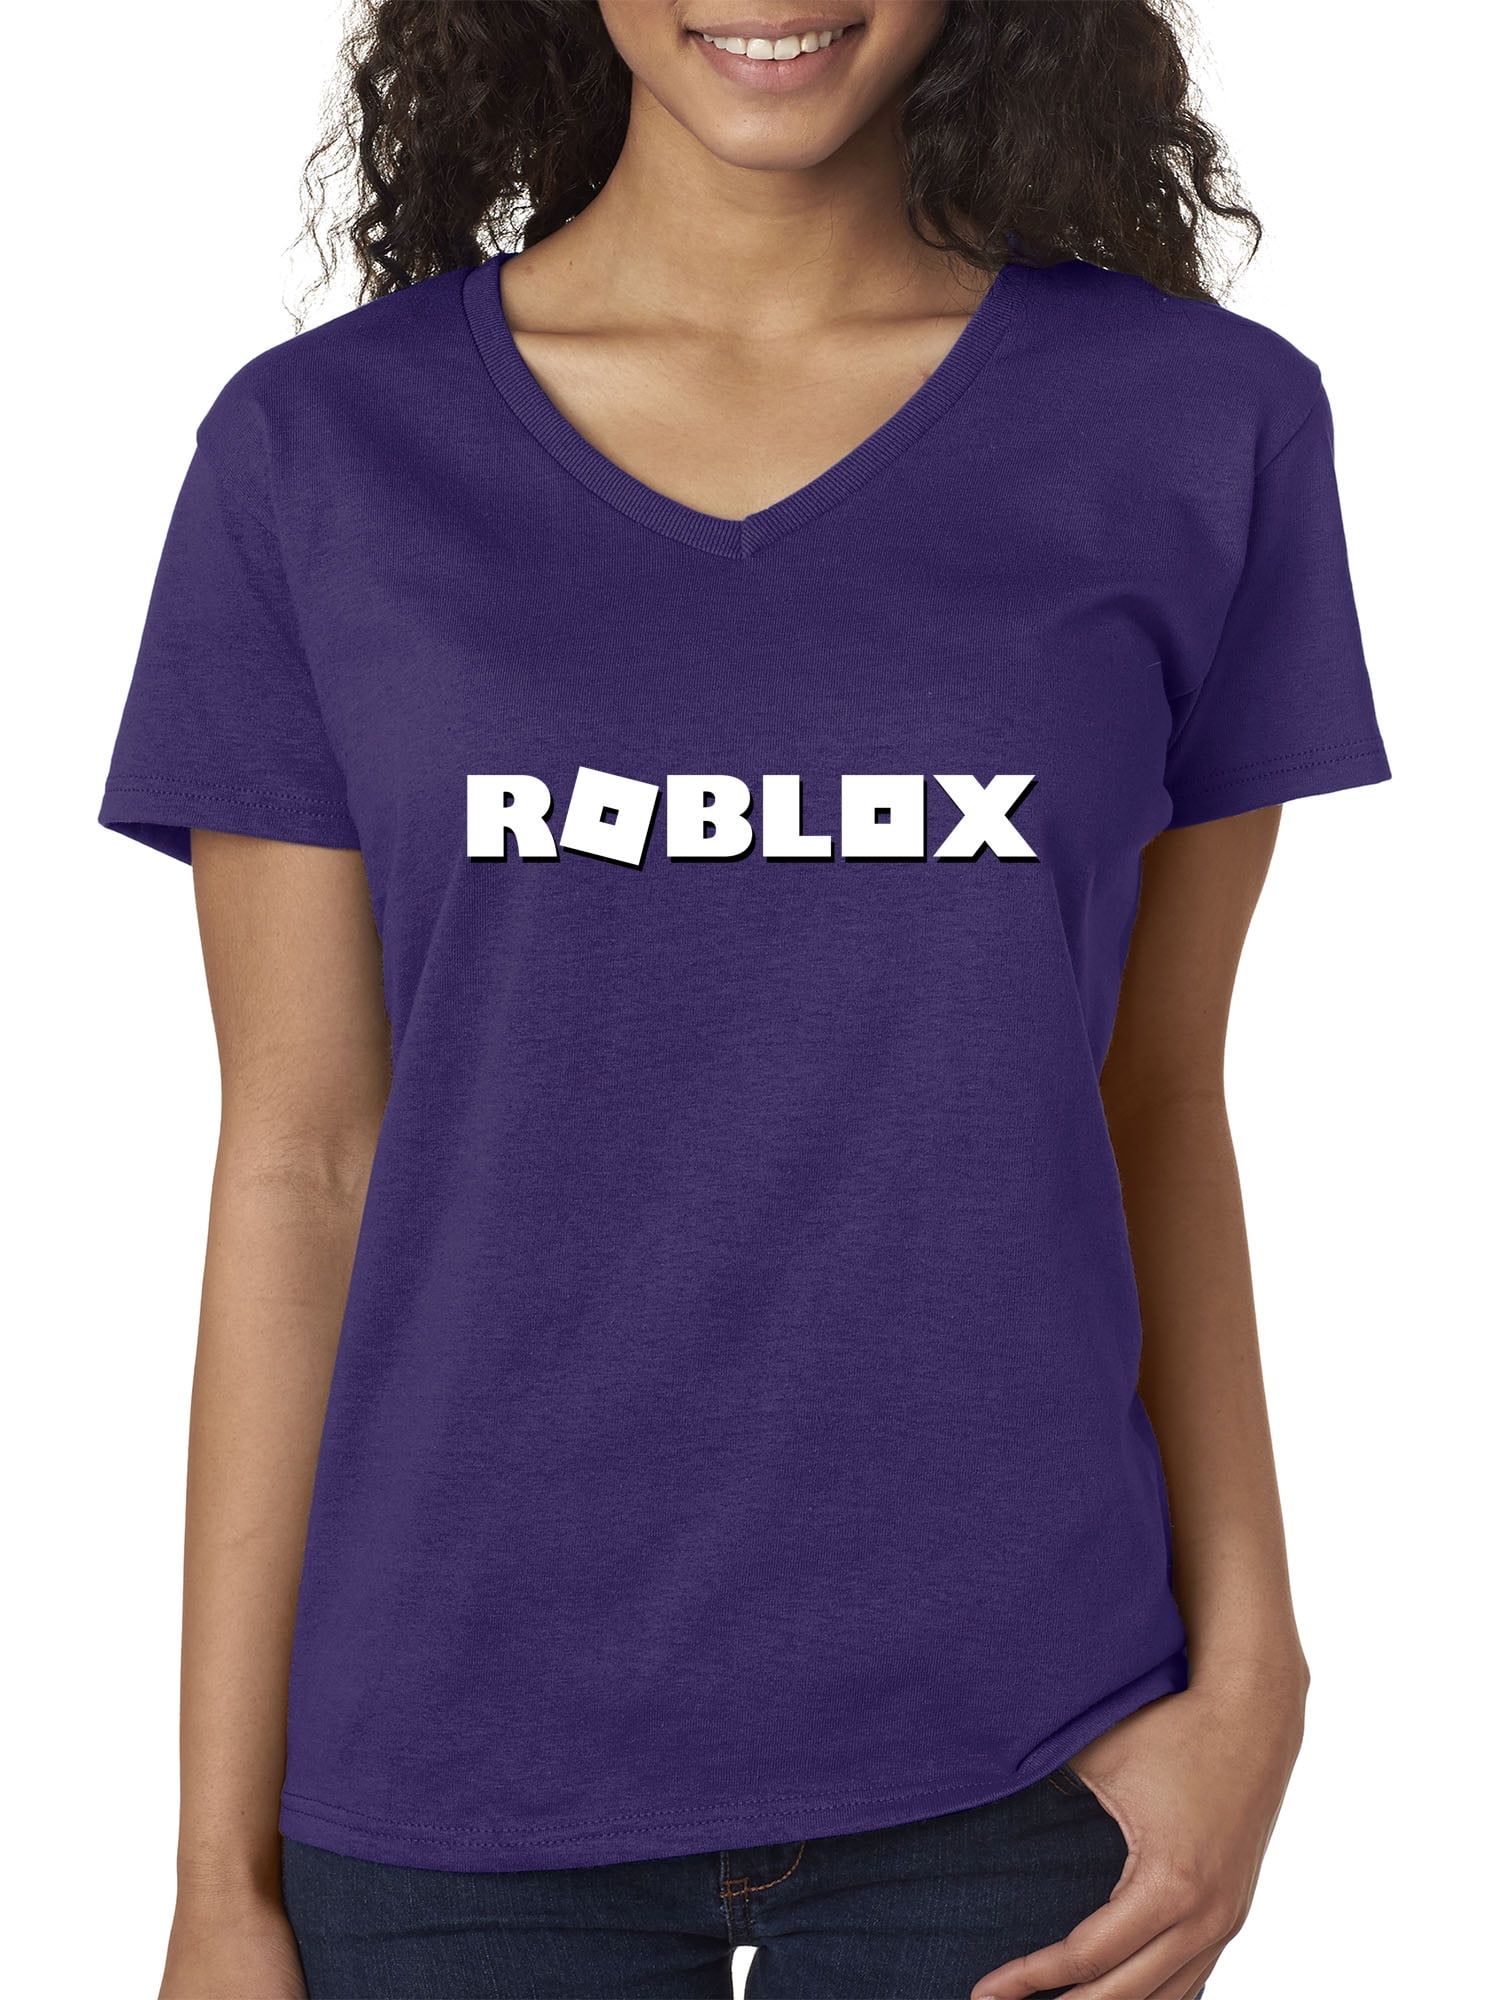 New Way New Way 923 Women S V Neck T Shirt Roblox Logo Game Accent Xl Purple Walmart Com Walmart Com - purple dino in a bag with necklace roblox